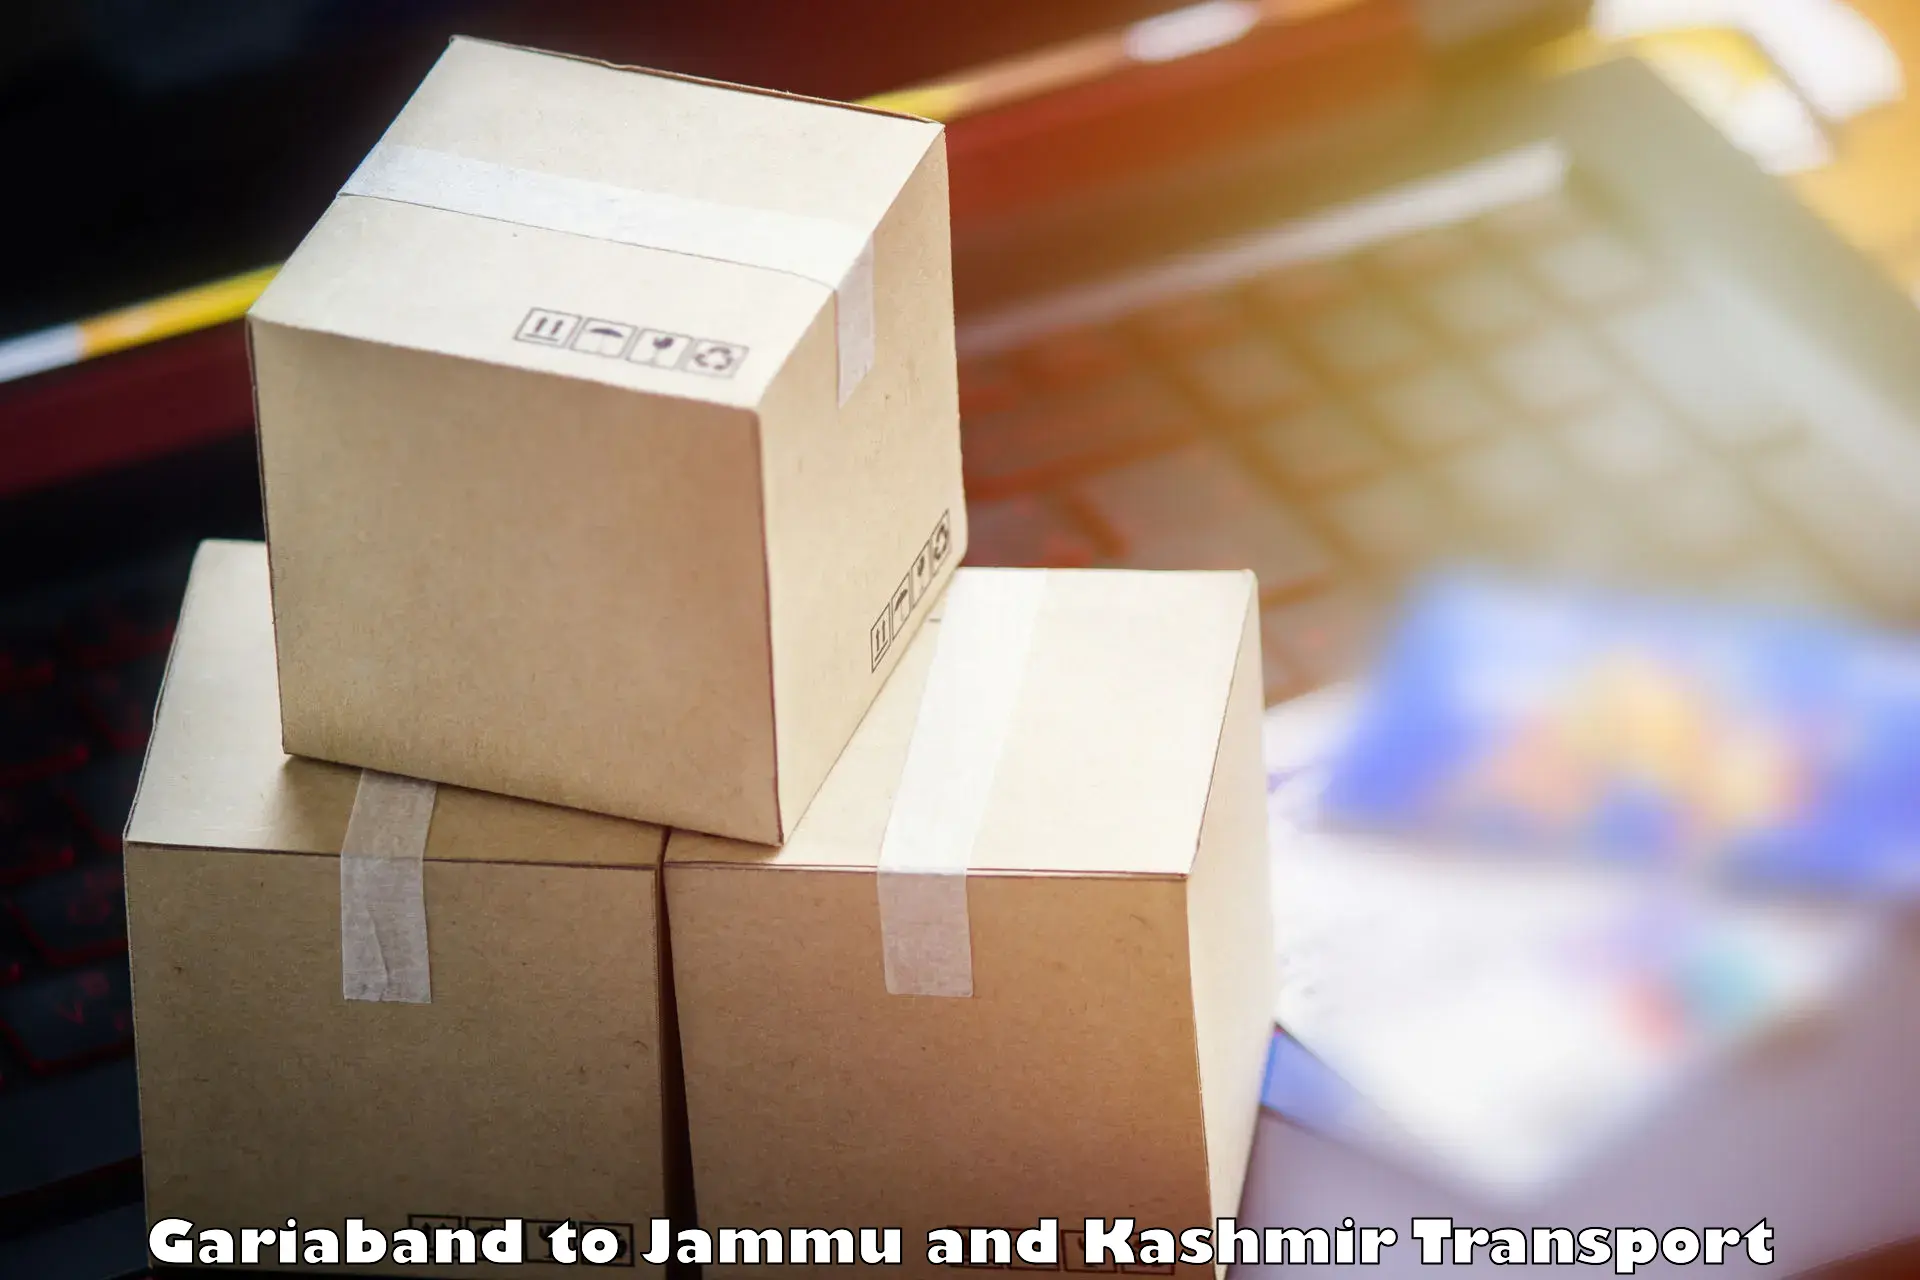 Interstate transport services Gariaband to Jammu and Kashmir